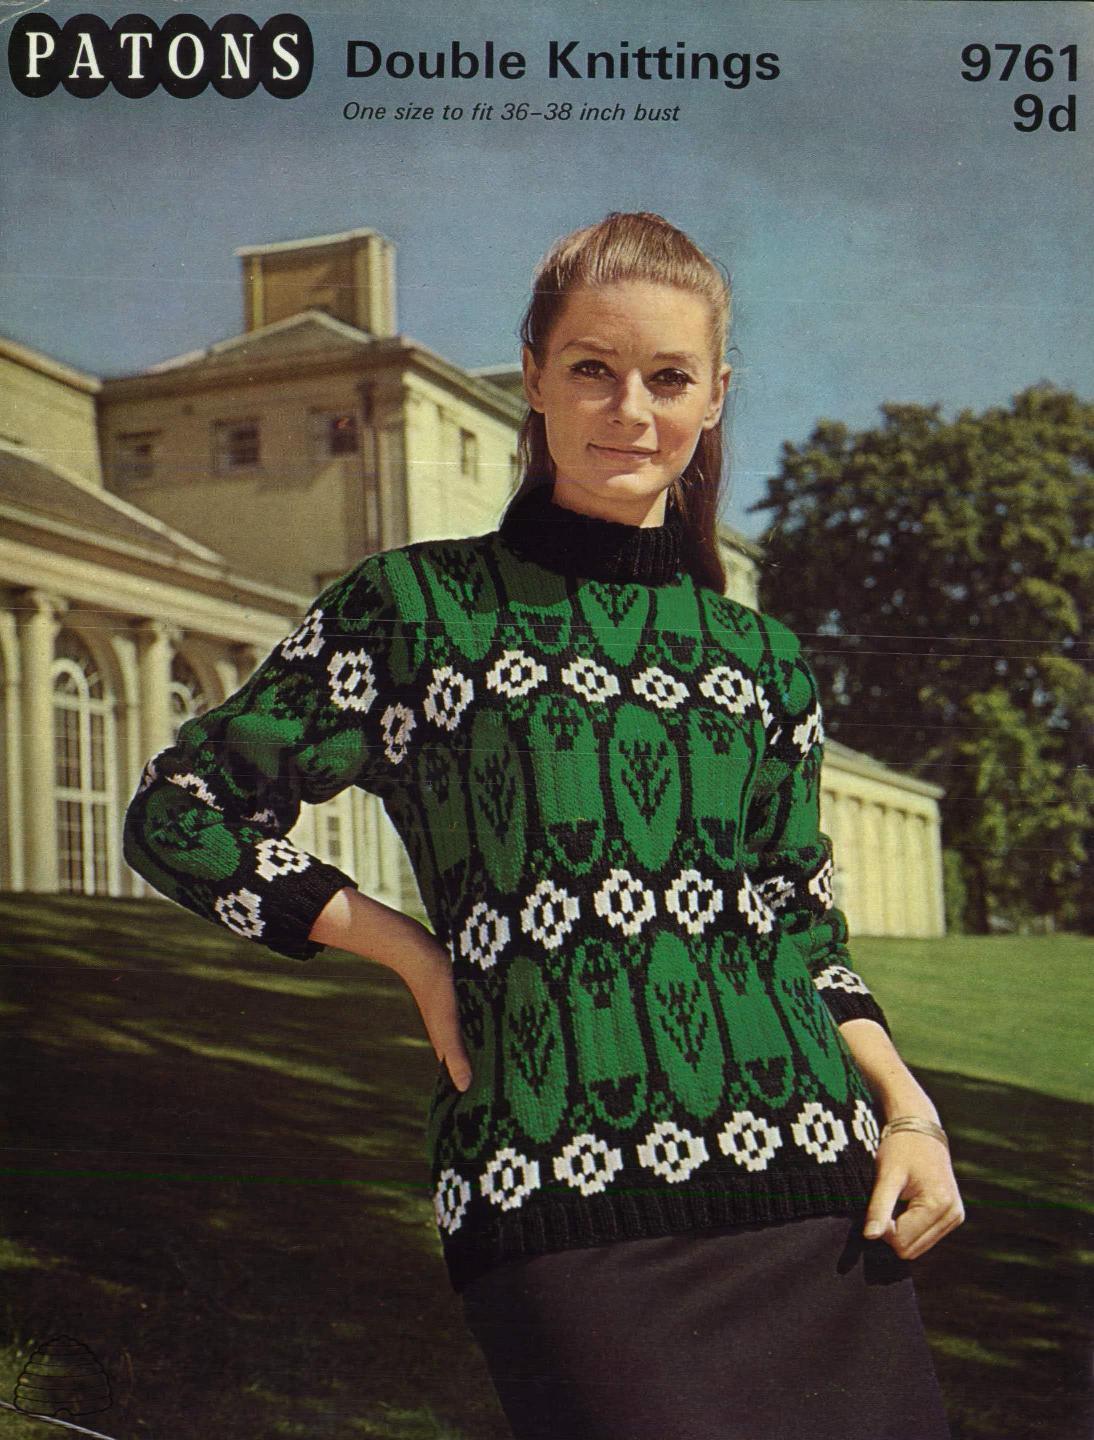 Cover of Patons leaflet 9761 - Lady in front of stately home wearing breen, black and white roll neck sweater with green oval panels containing black motifscontaining